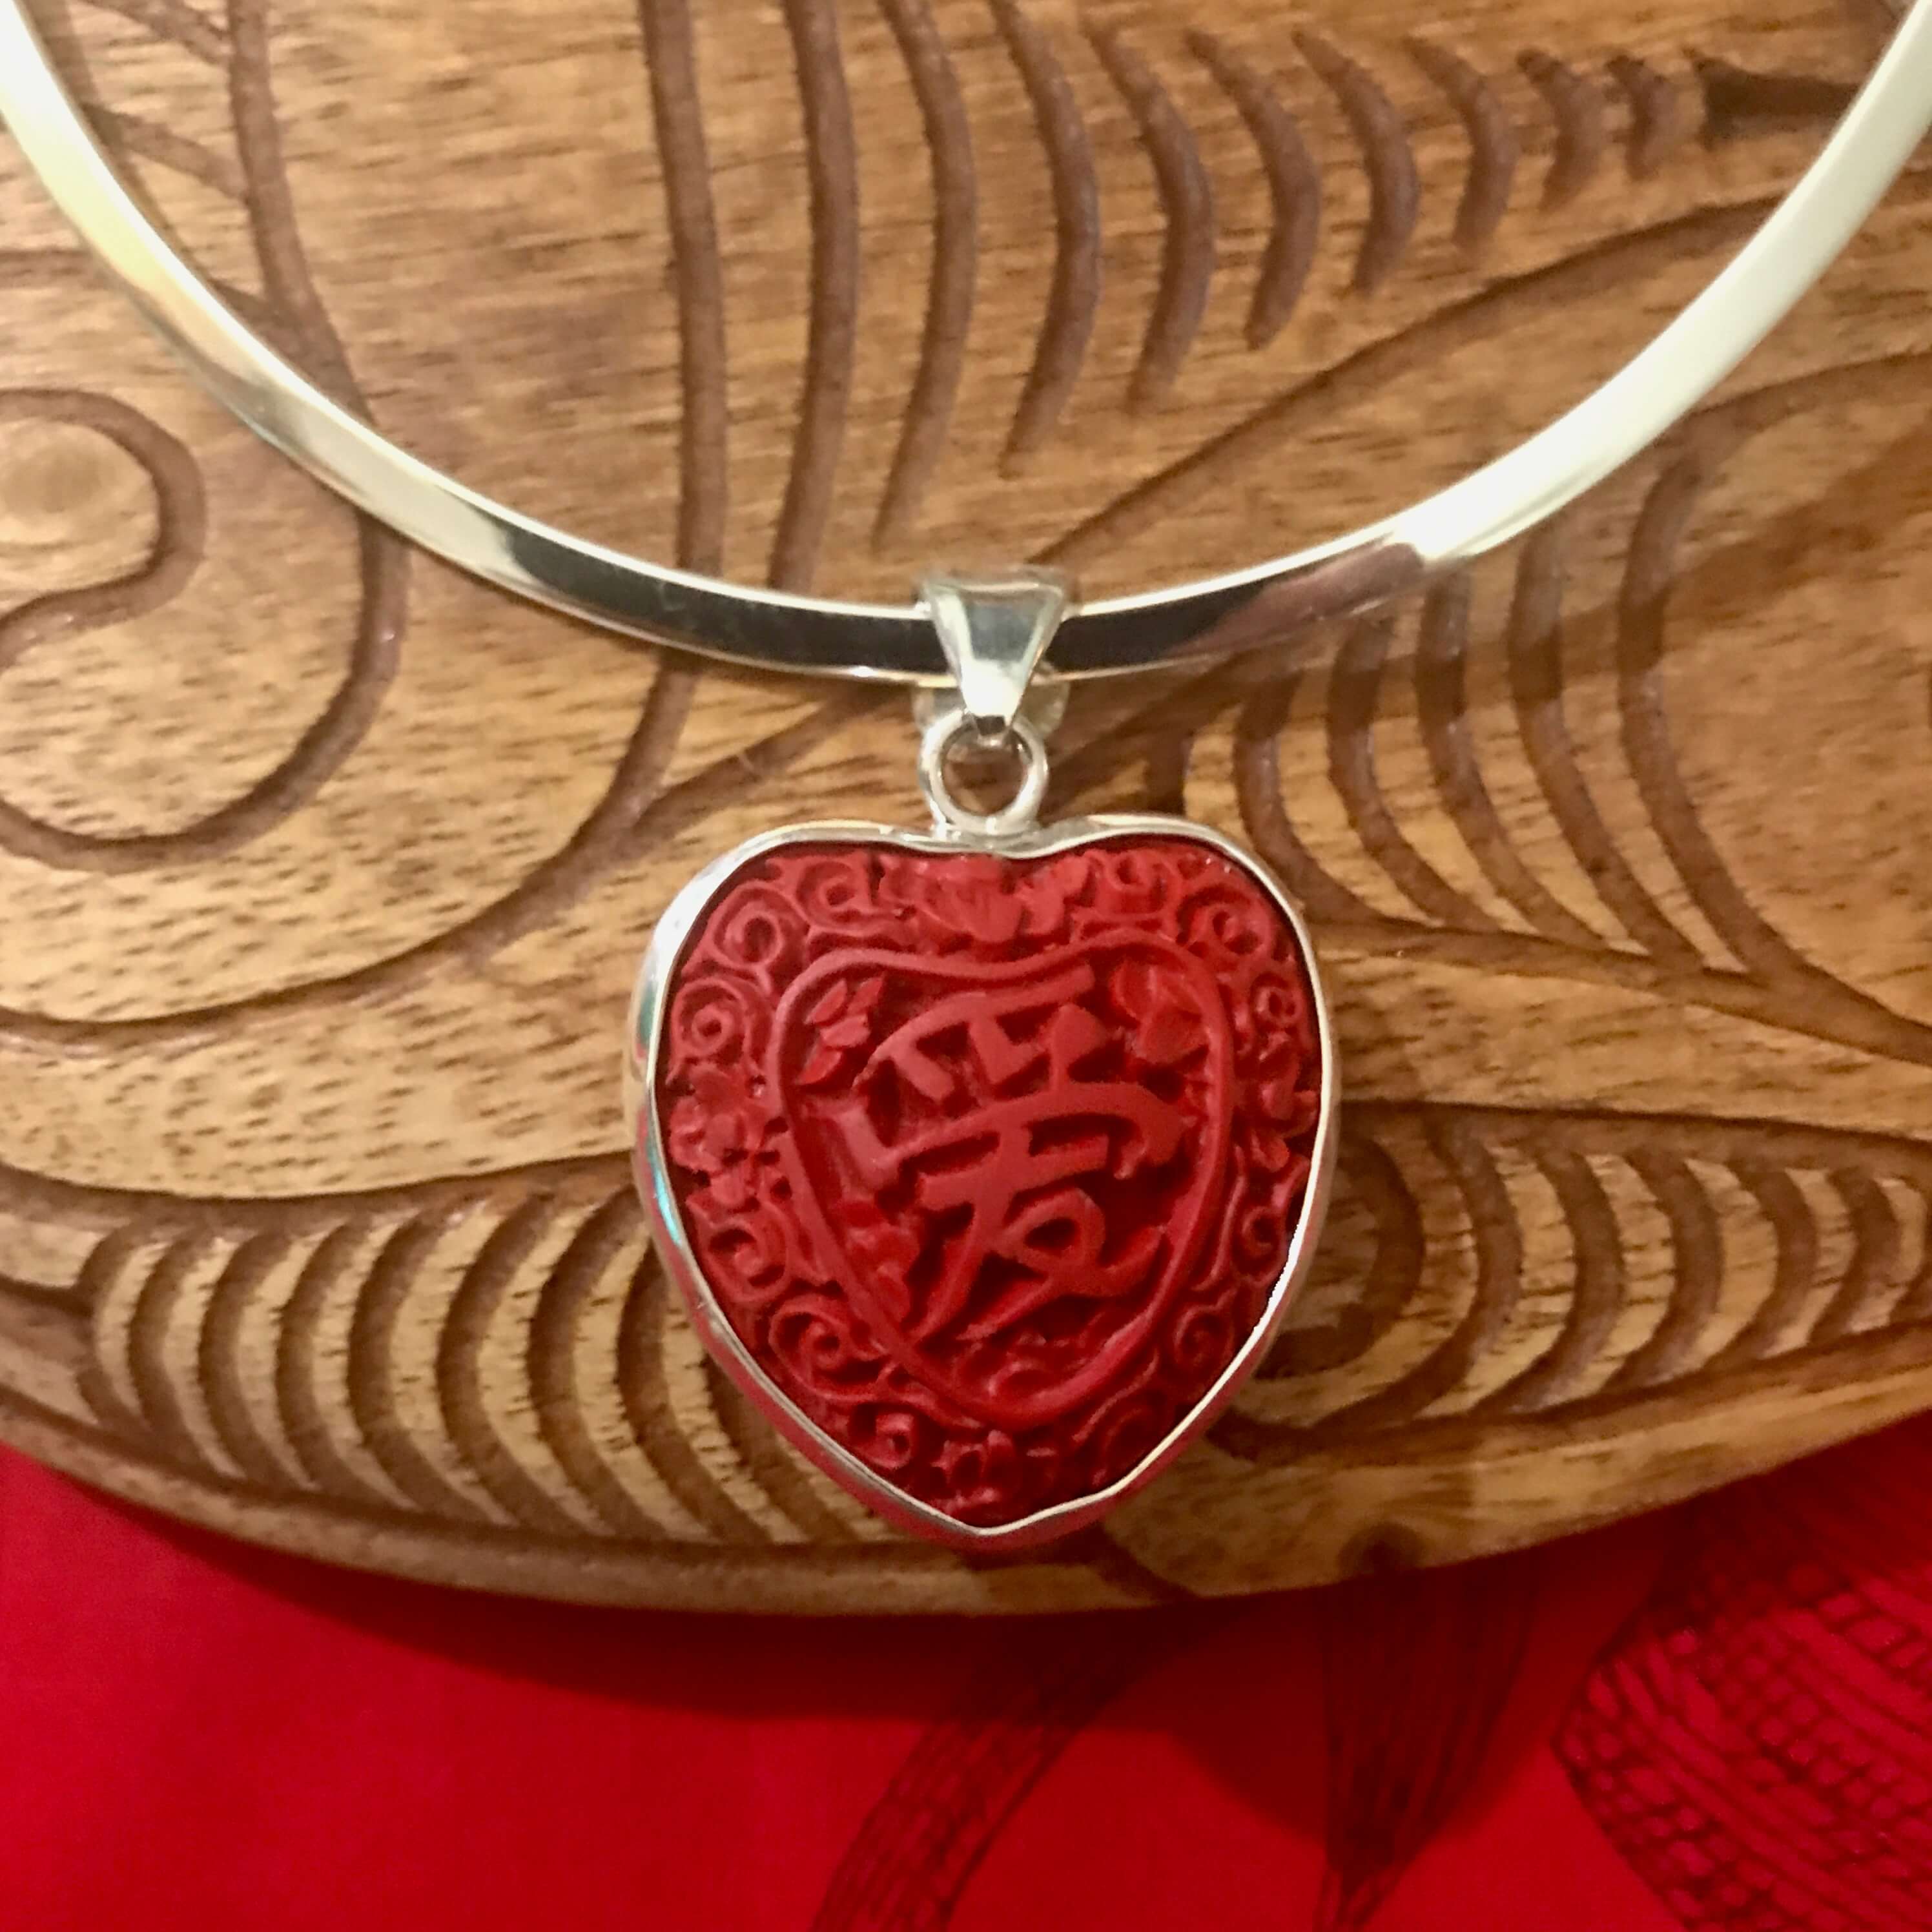 Island jewelry red cinnibar heart shaped pendant necklace with a stirling silver setting | Aloha Products USA